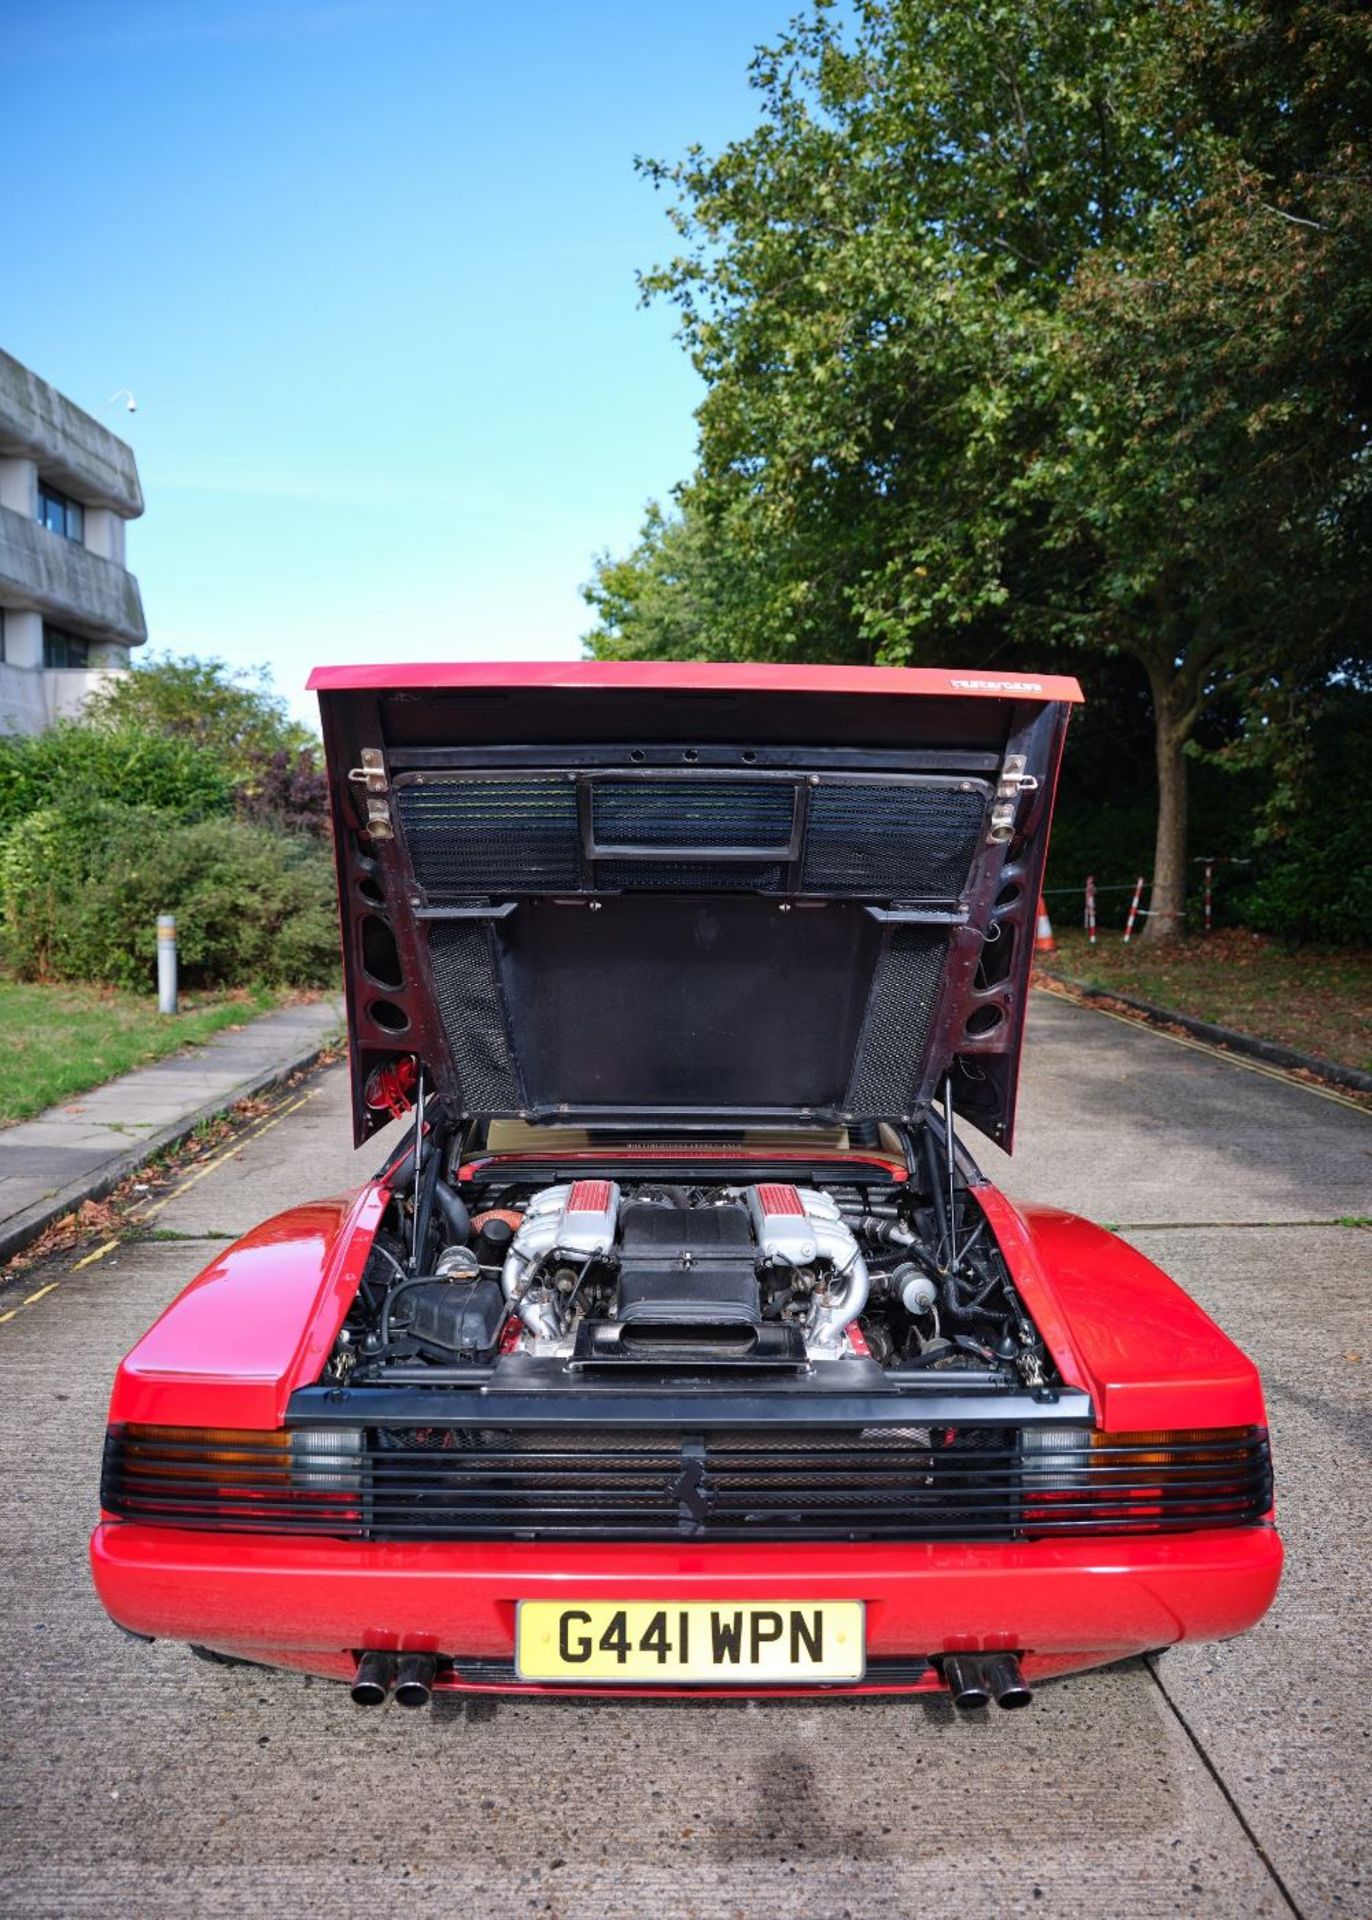 1989 FERRARI TESTAROSSA Registration Number: G441 WPN Chassis Number: ZFFAA17C000082817 Recorded - Image 13 of 59